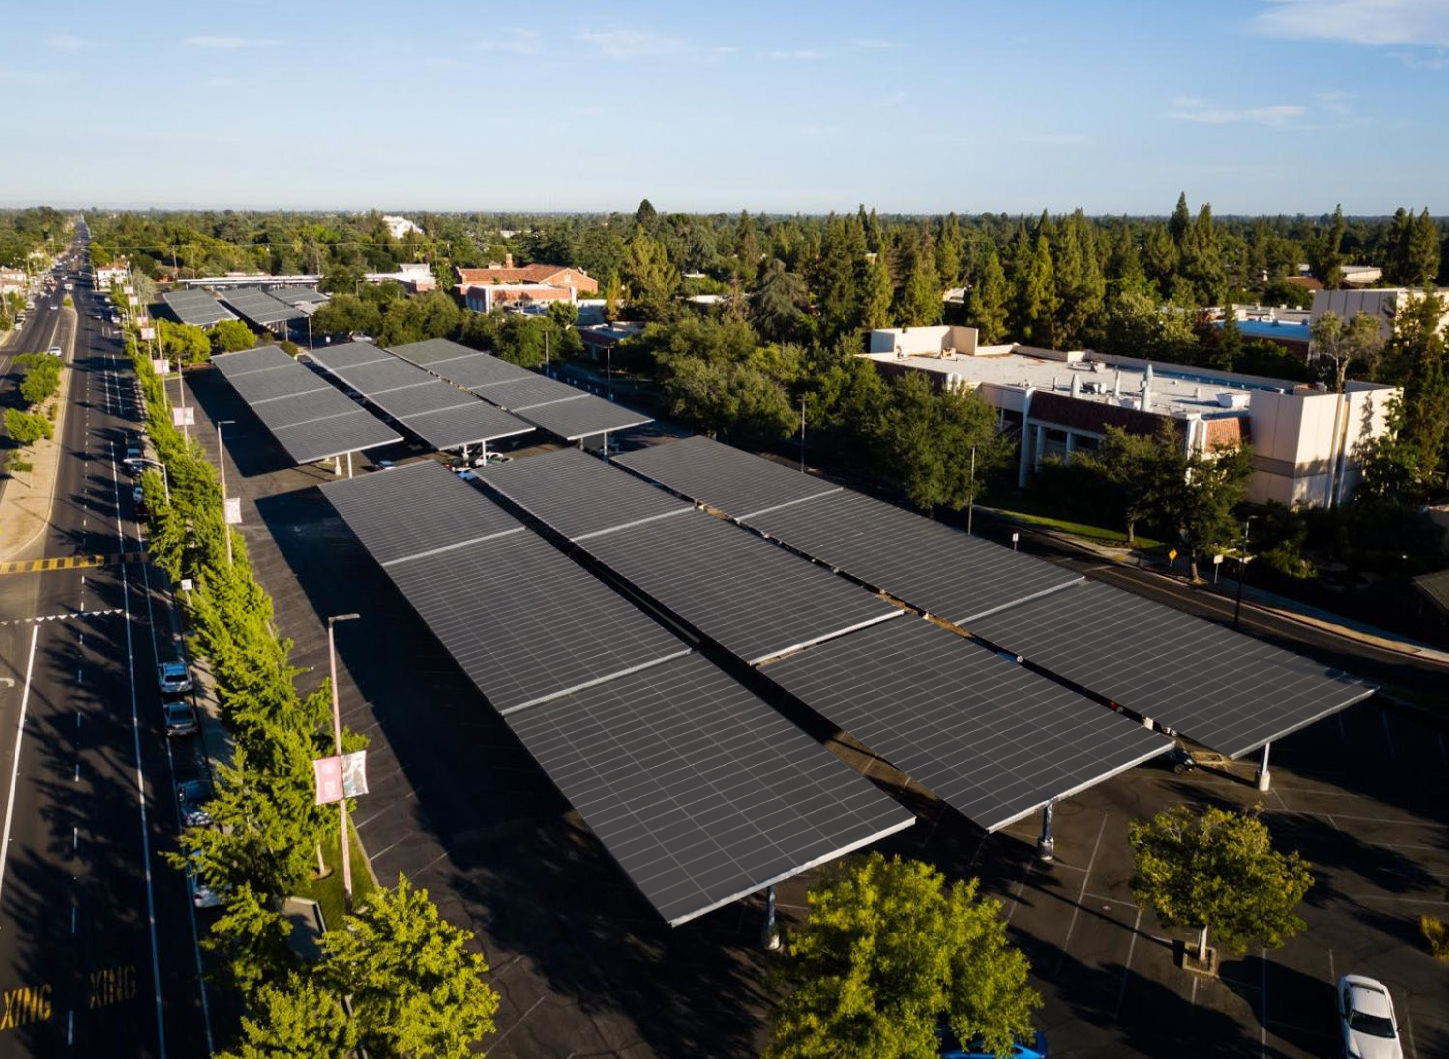 Solar panel carport surrounded by businesses and wooded areas in California.